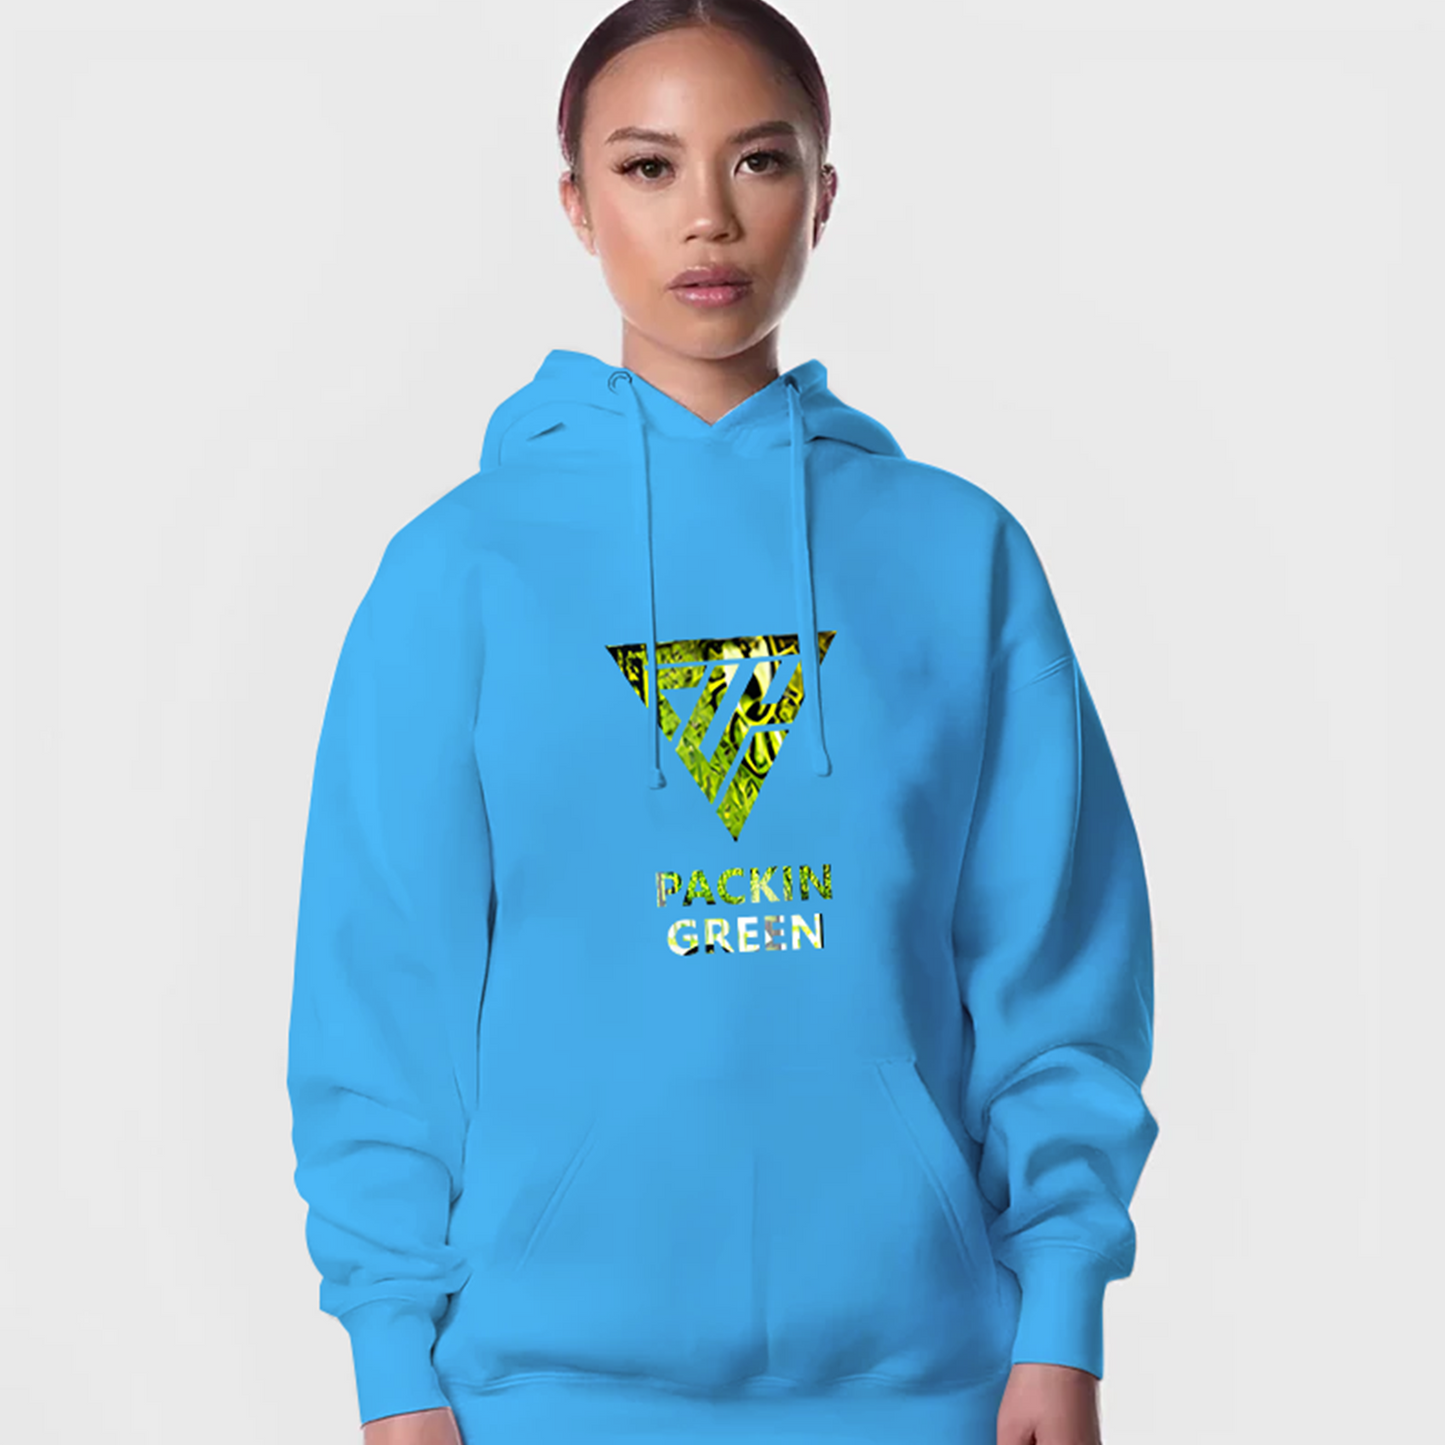 Women's Packing Green Hoodie/Pullover